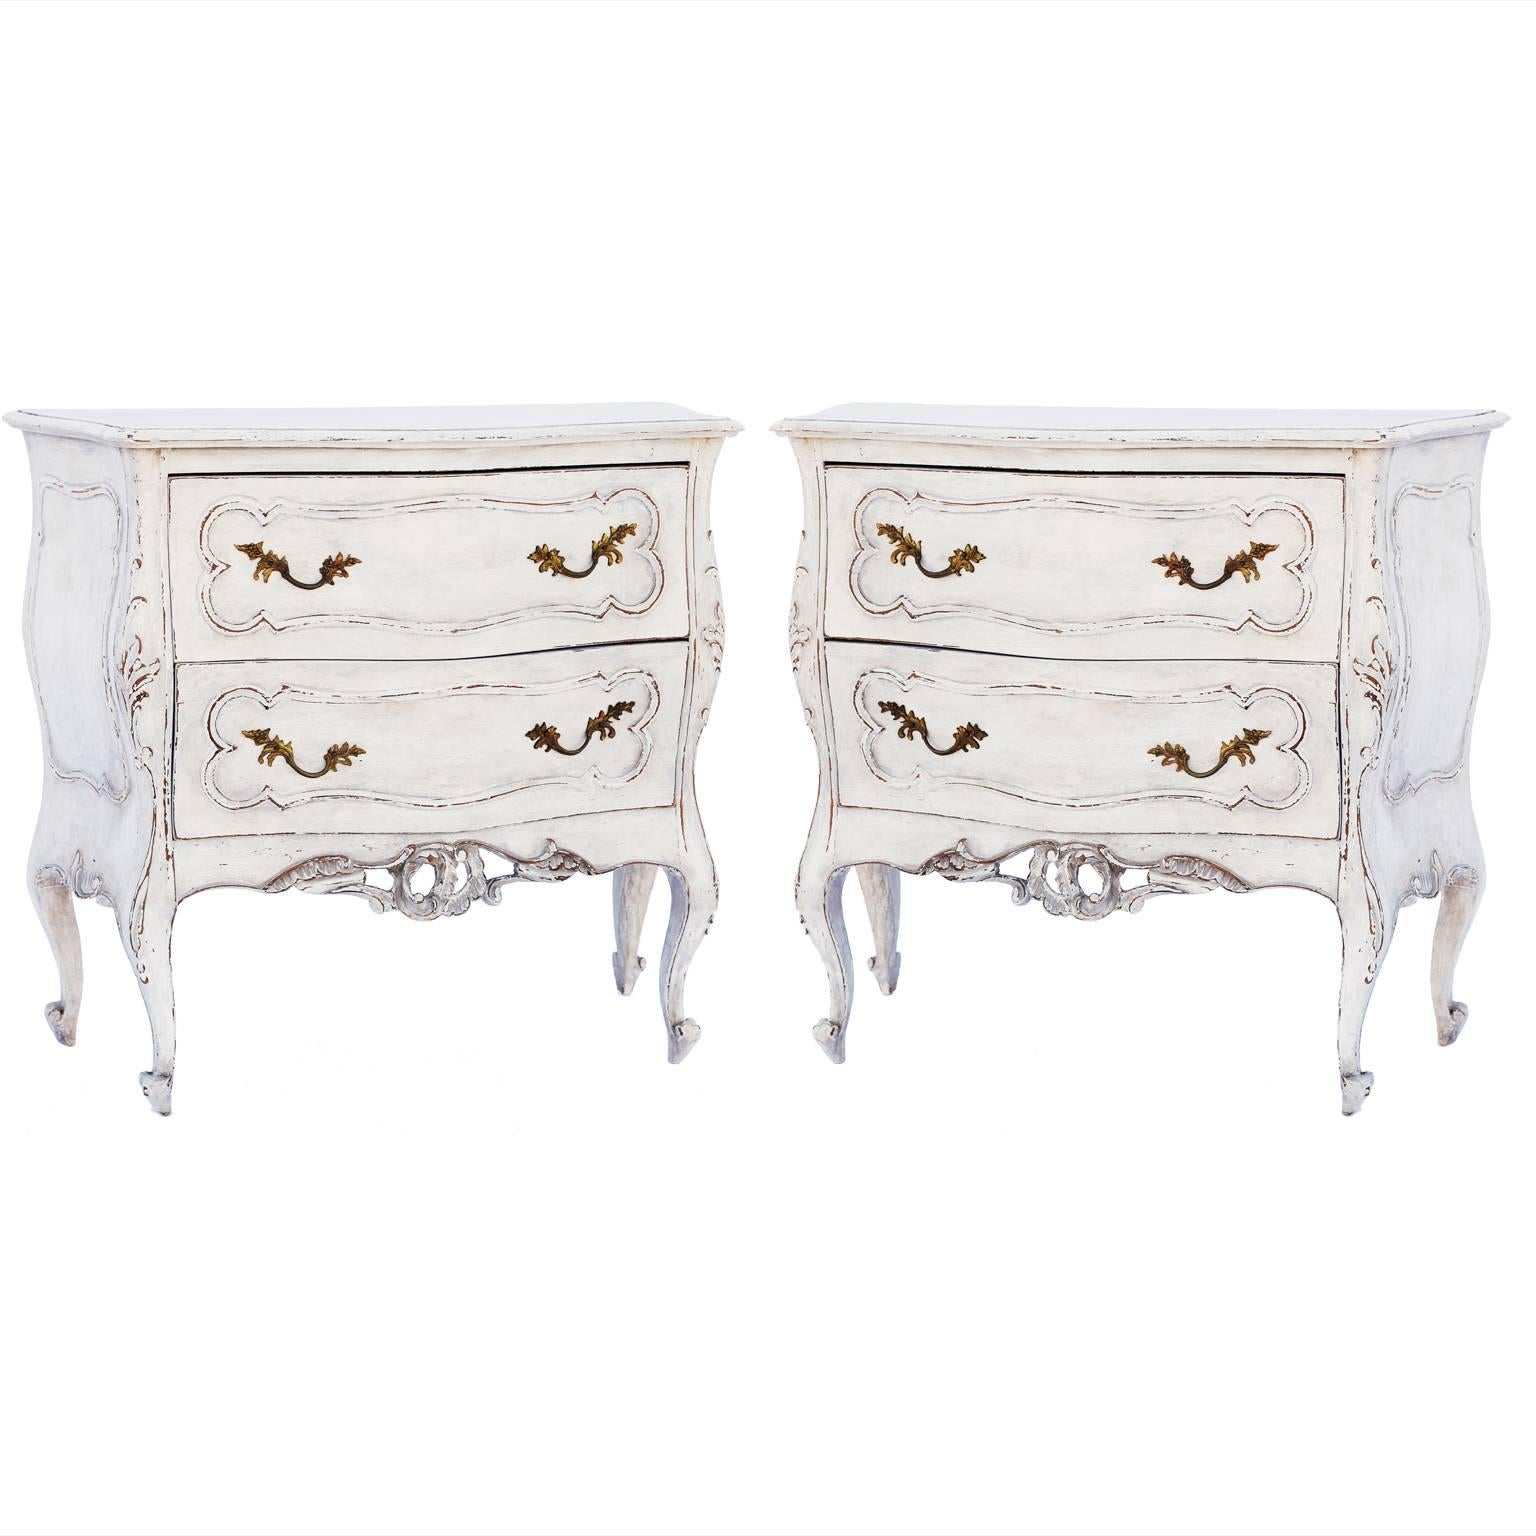 Pair of Painted Rococo-Style Nightstand Commodes